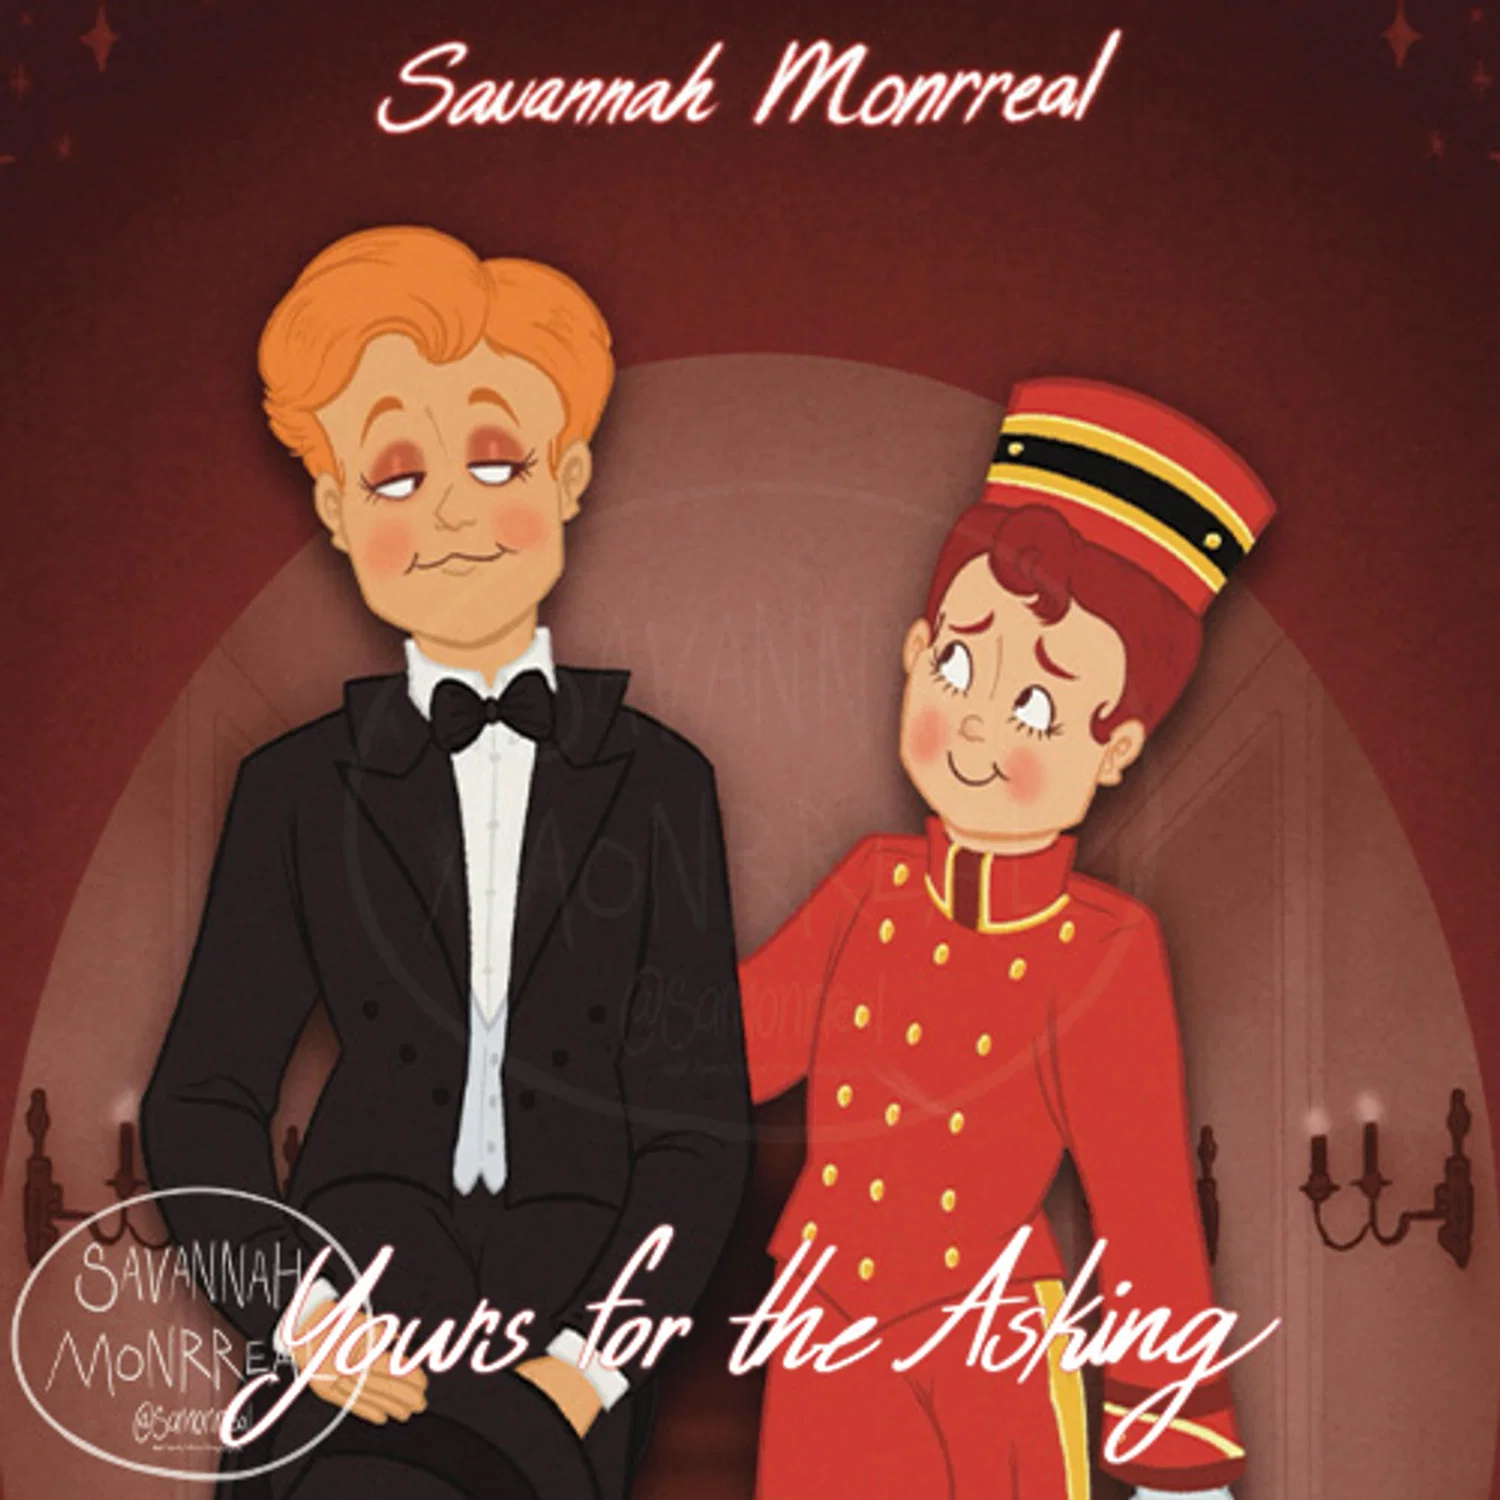 Comic cover of two gentlemen walking. The one on the left is wearing a black tuxedo, holding a top hat, has orange-blonde hair, and is smiling at the other. The other boy is a bellhop with red-brown hair, a curl settled on his forehead from under his had, a red uniform with three rows of golden buttons. He is also smiling at the other. White text on the top reads "Savannah Monrreal" and the Botton text reads "Yours for the Asking" There is a watermark in the corner that says "Savannah Monrreal @samonrreal"